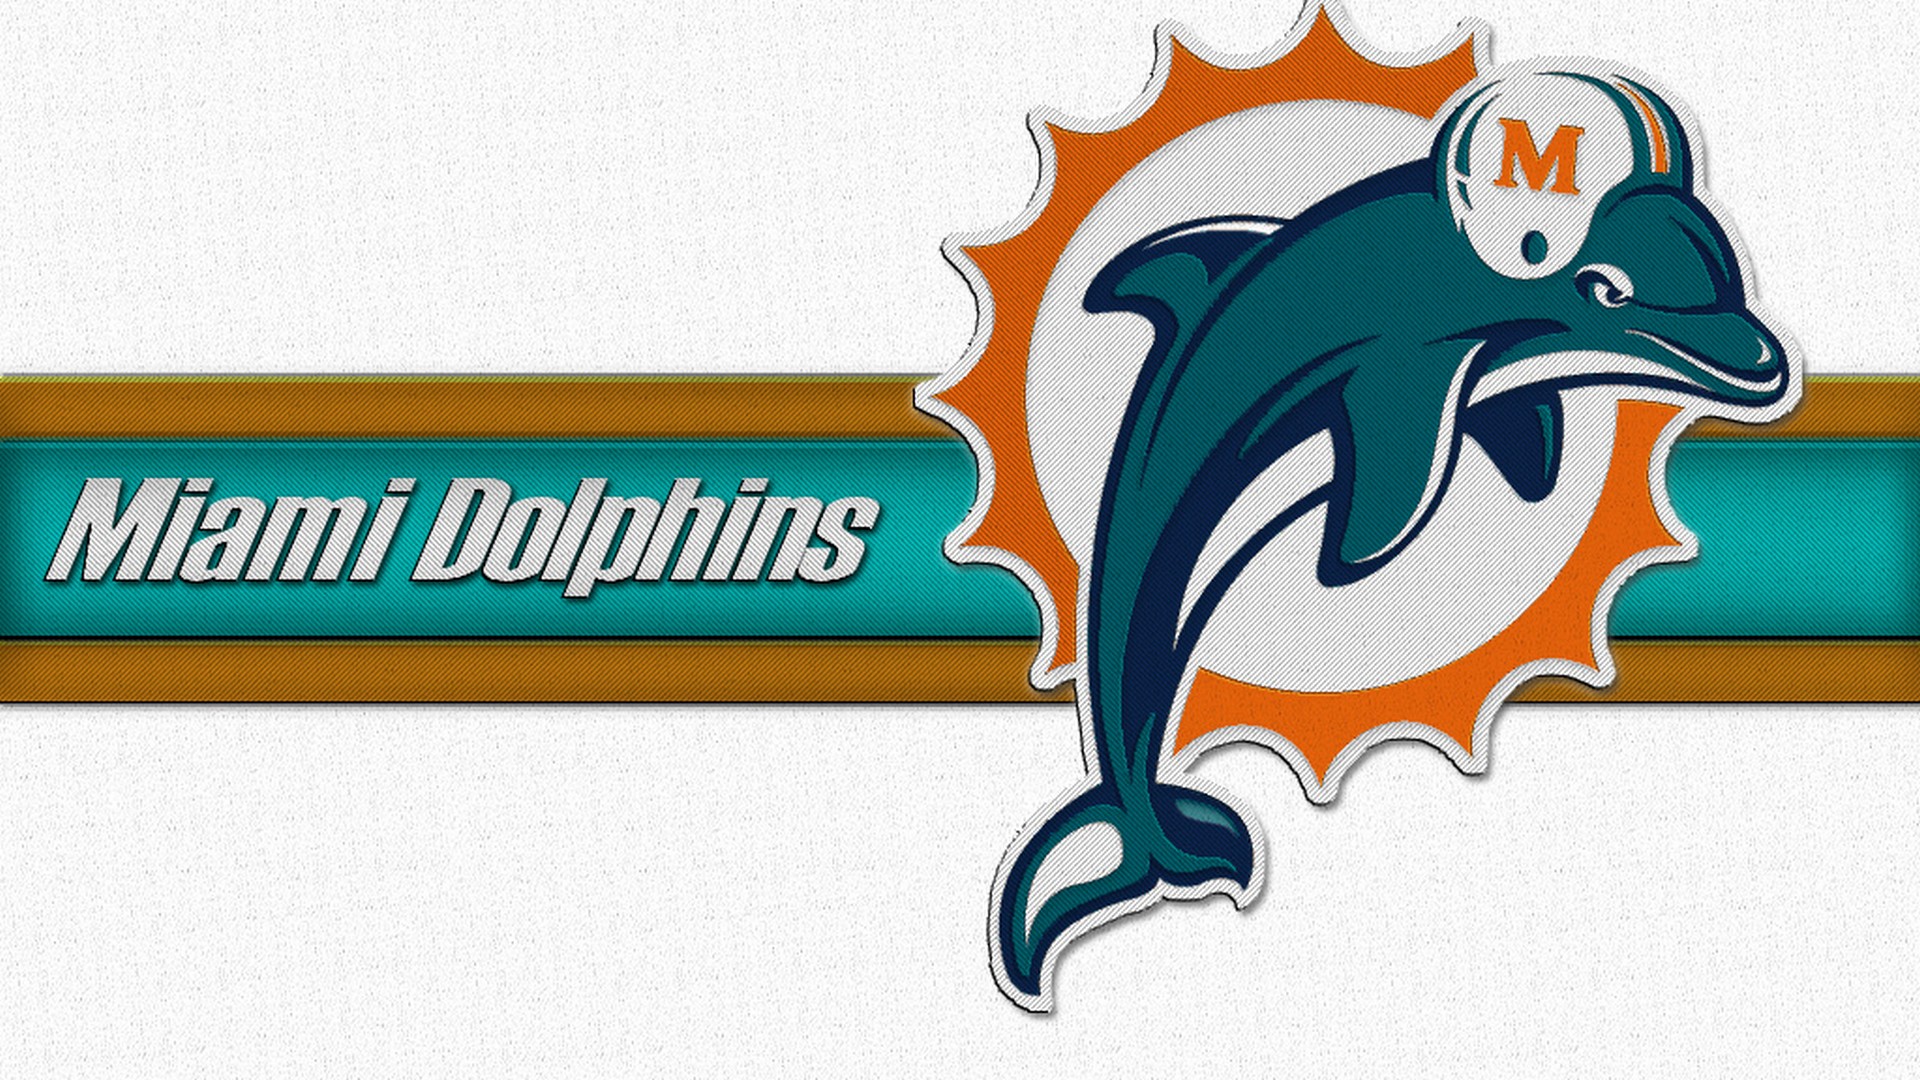 HD Backgrounds Miami Dolphins with resolution 1920x1080 pixel. You can make this wallpaper for your Mac or Windows Desktop Background, iPhone, Android or Tablet and another Smartphone device